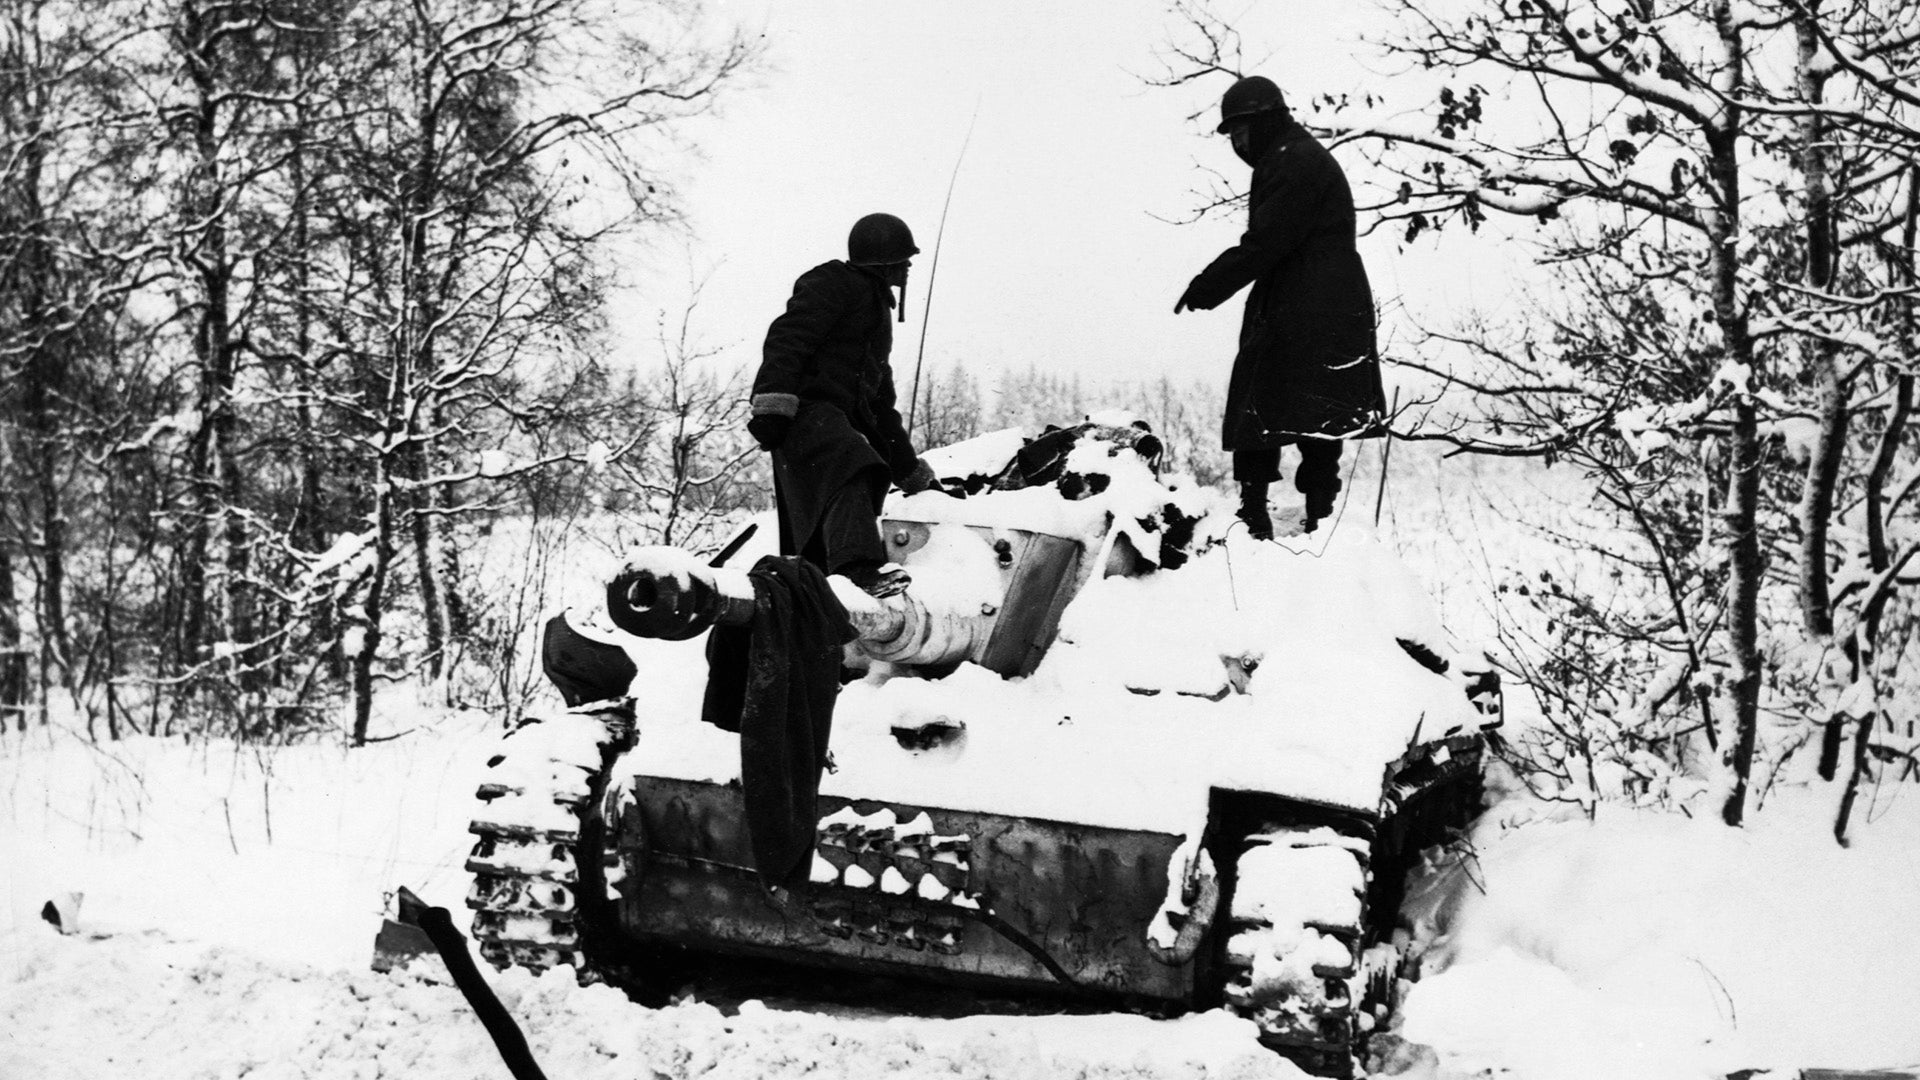 Two soldiers look at a dead crewman on a snow-covered German tank during the Battle of the Bulge. St. Vith, Belgium. | Location: St. Vith, Belgium. (Photo by © CORBIS/Corbis via Getty Images)